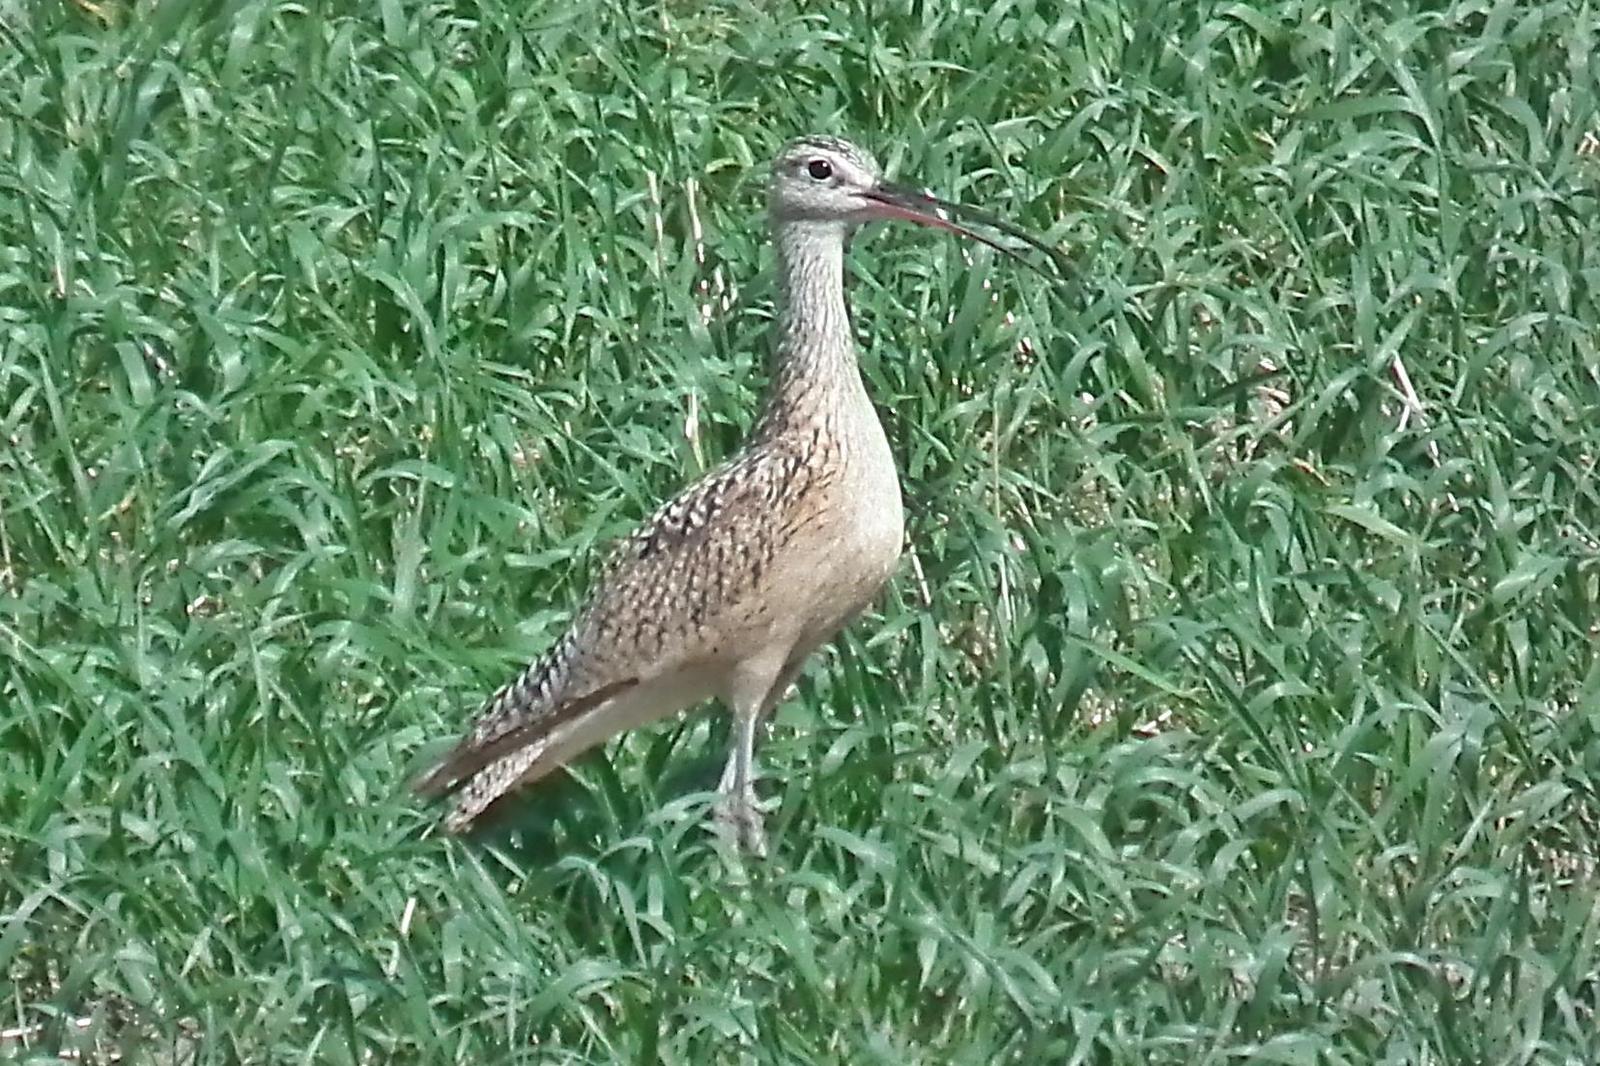 Long-billed Curlew Photo by Enid Bachman